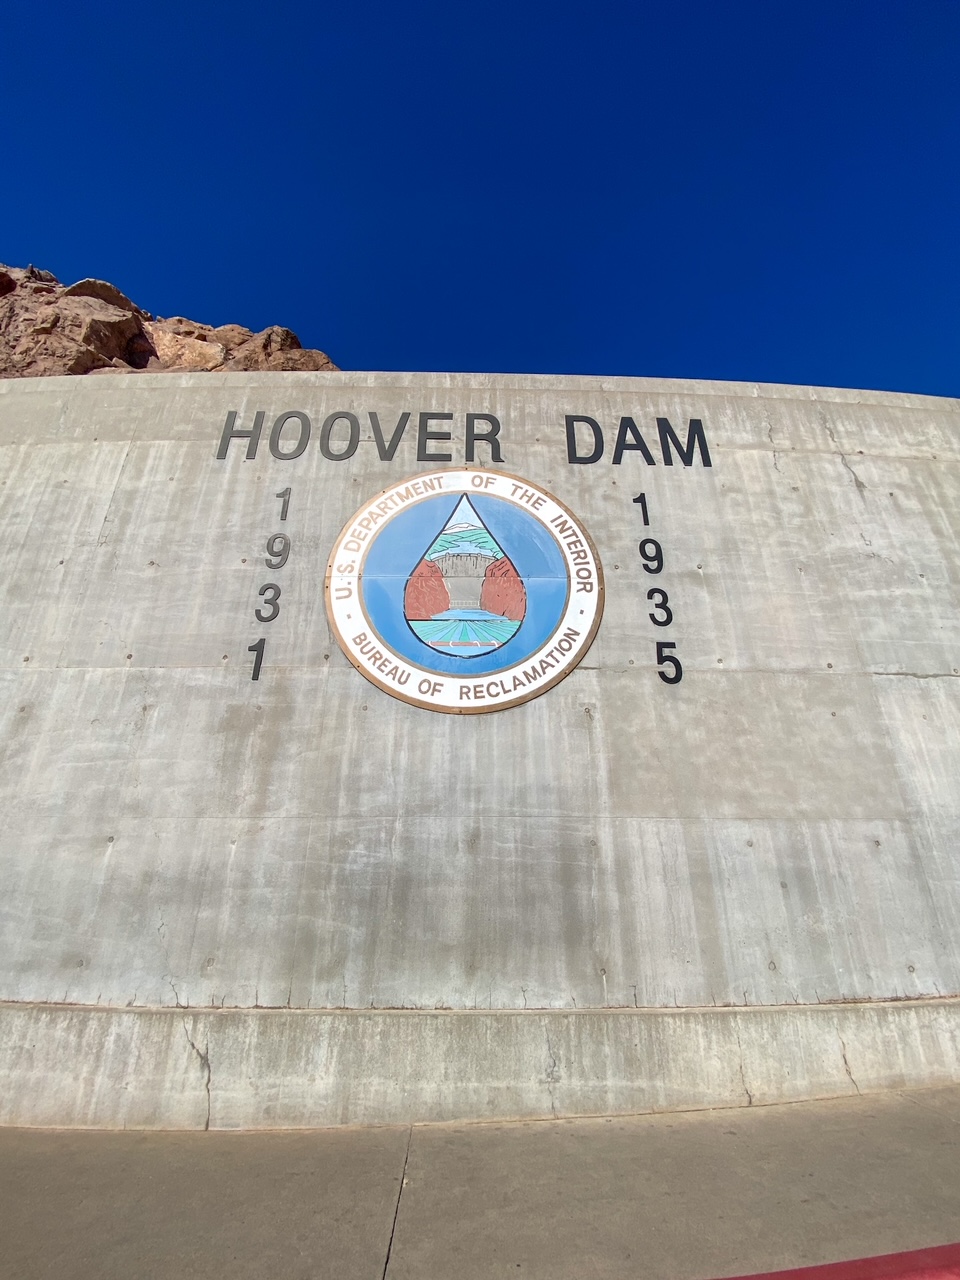 the Hoover Dam, a great place to visit near Las Vegas